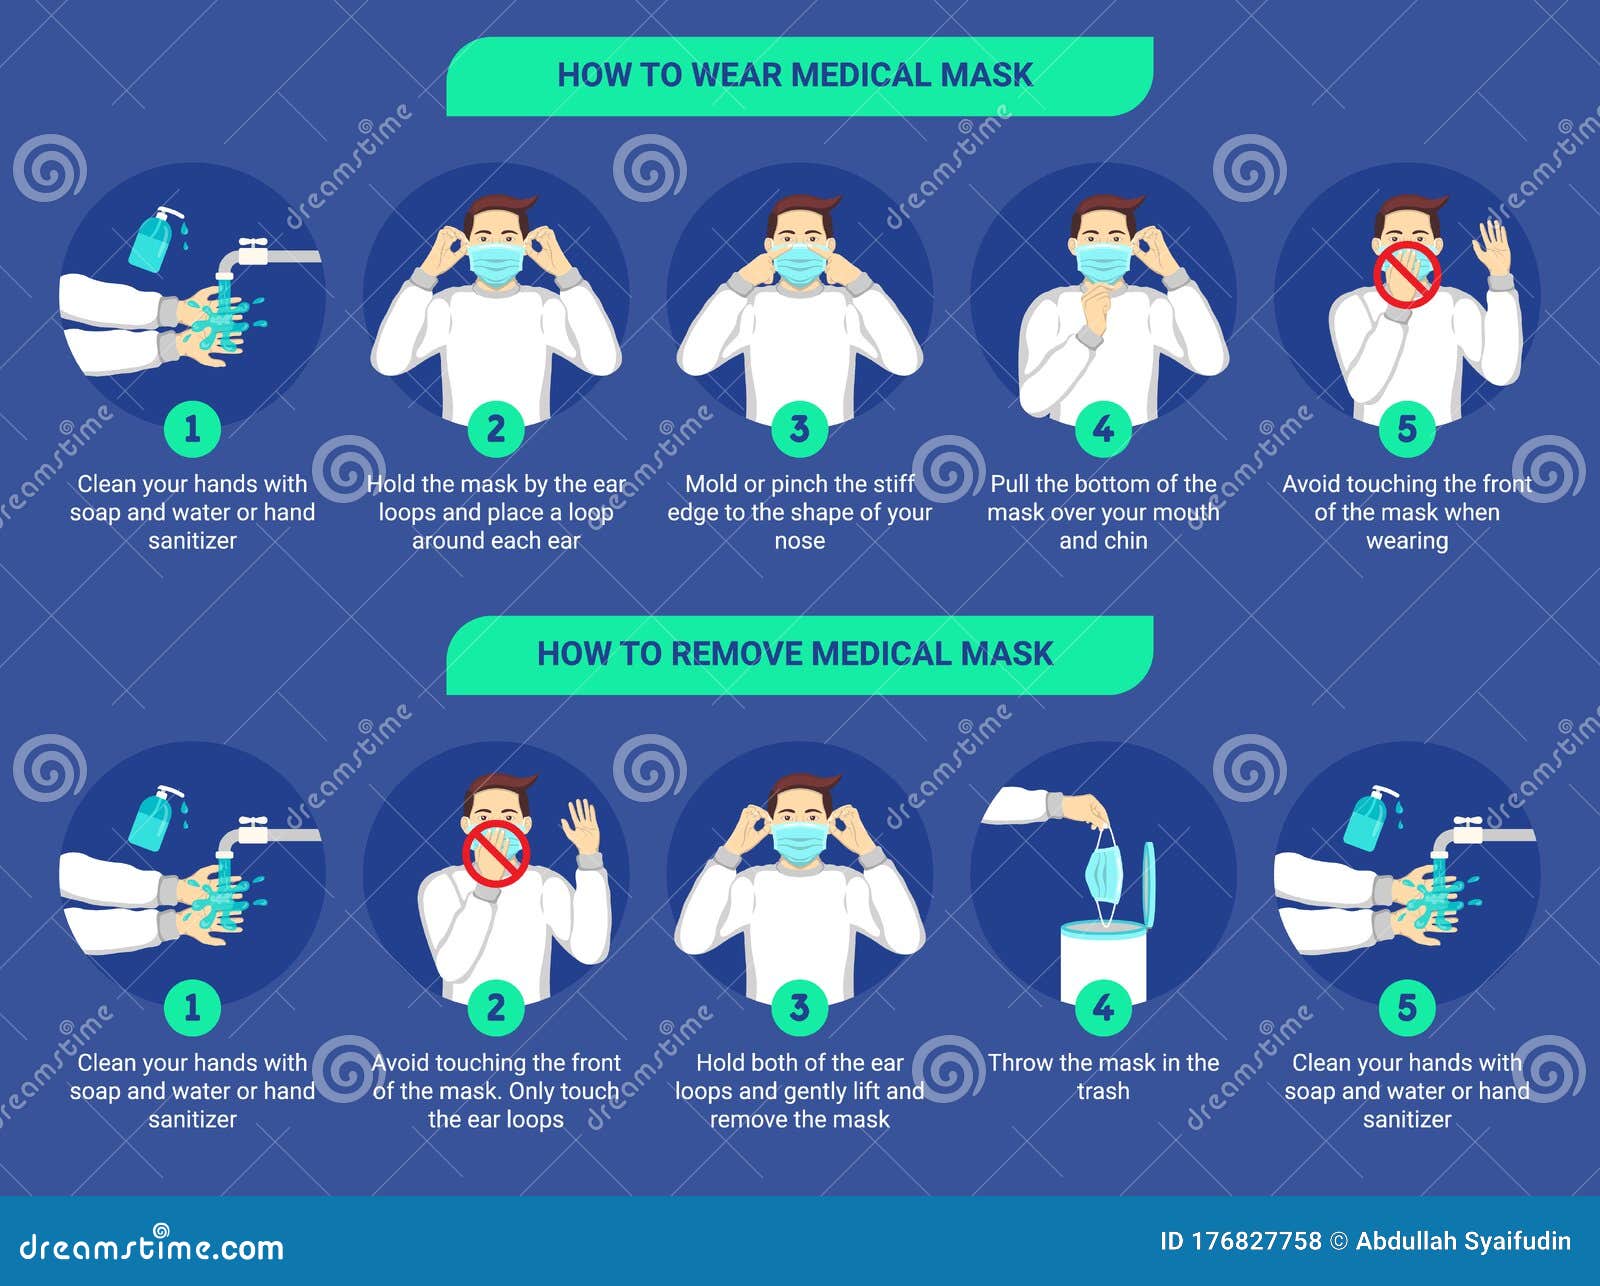 how to wear medical mask and how to remove medical mask properly